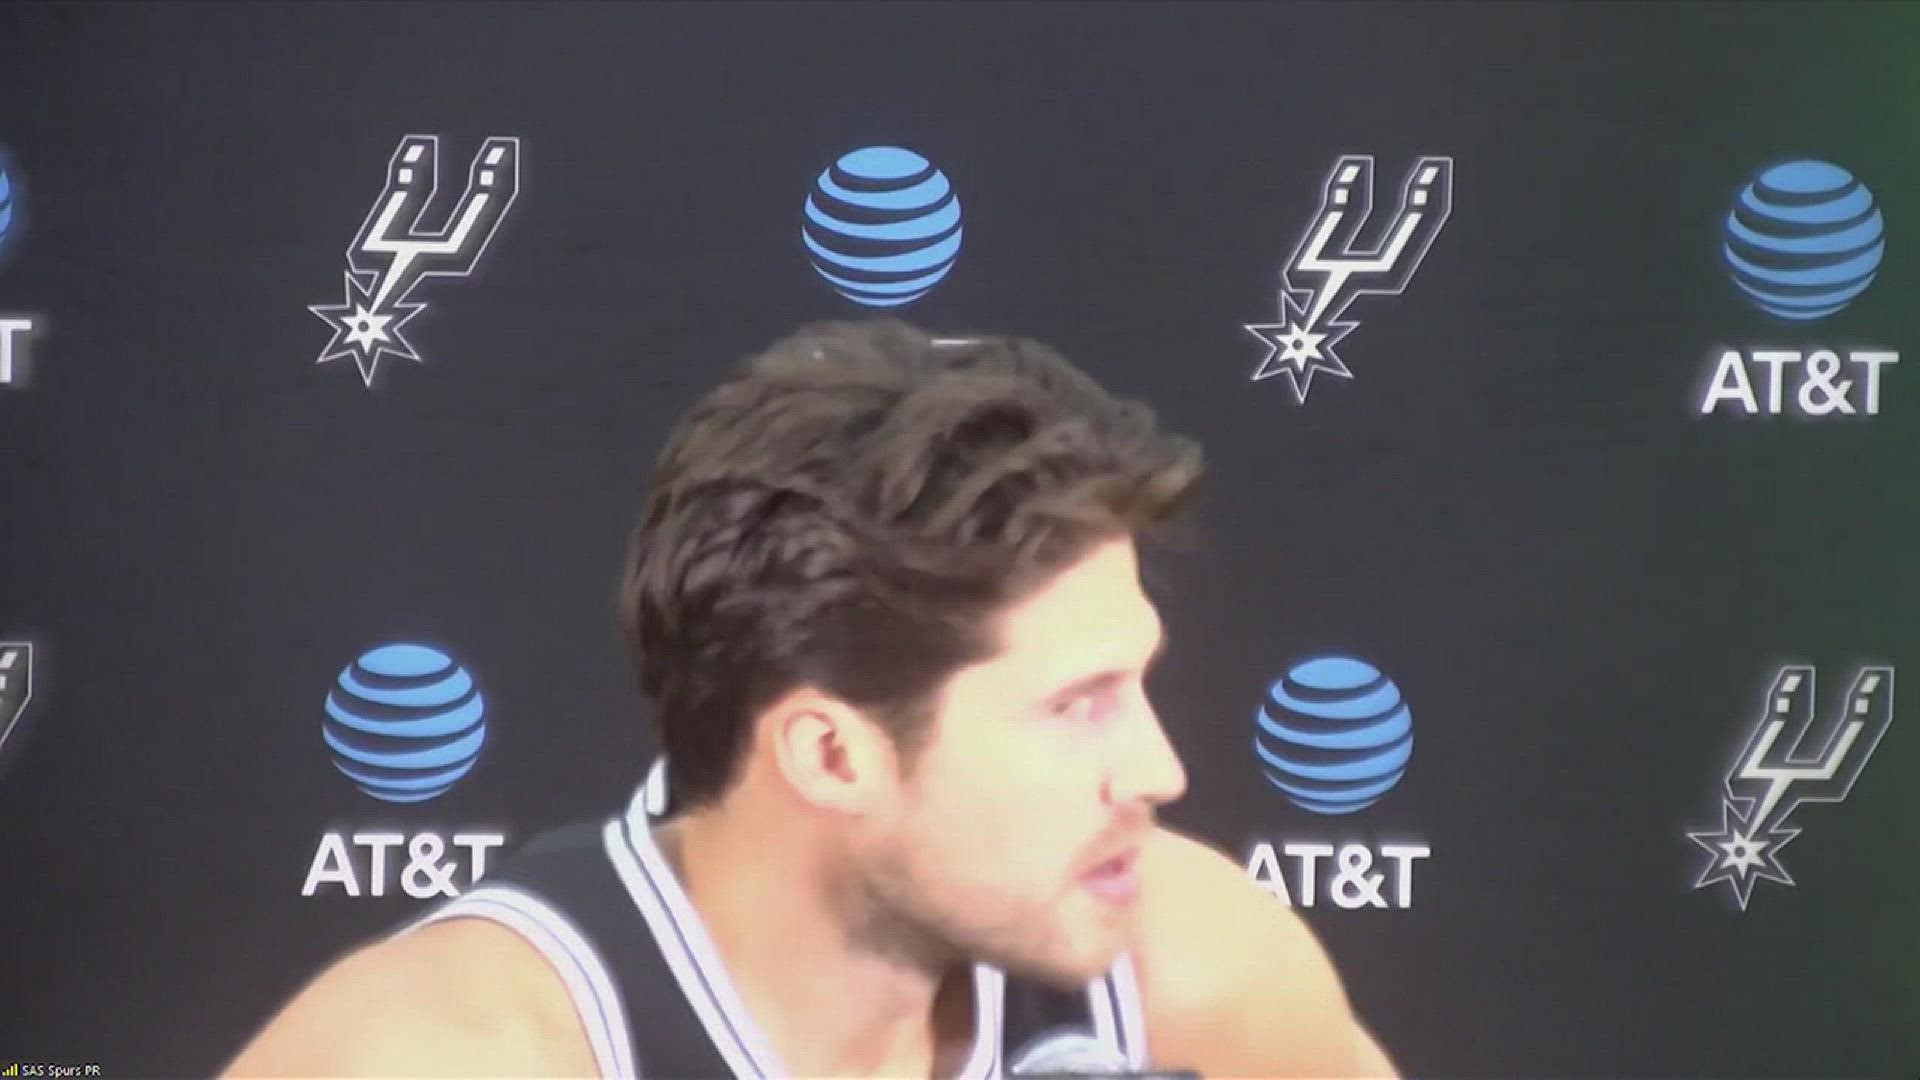 Spurs player Doug McDermott gives an update on the upcoming Spurs season at the 2021 Media Day on September 27, 2021.